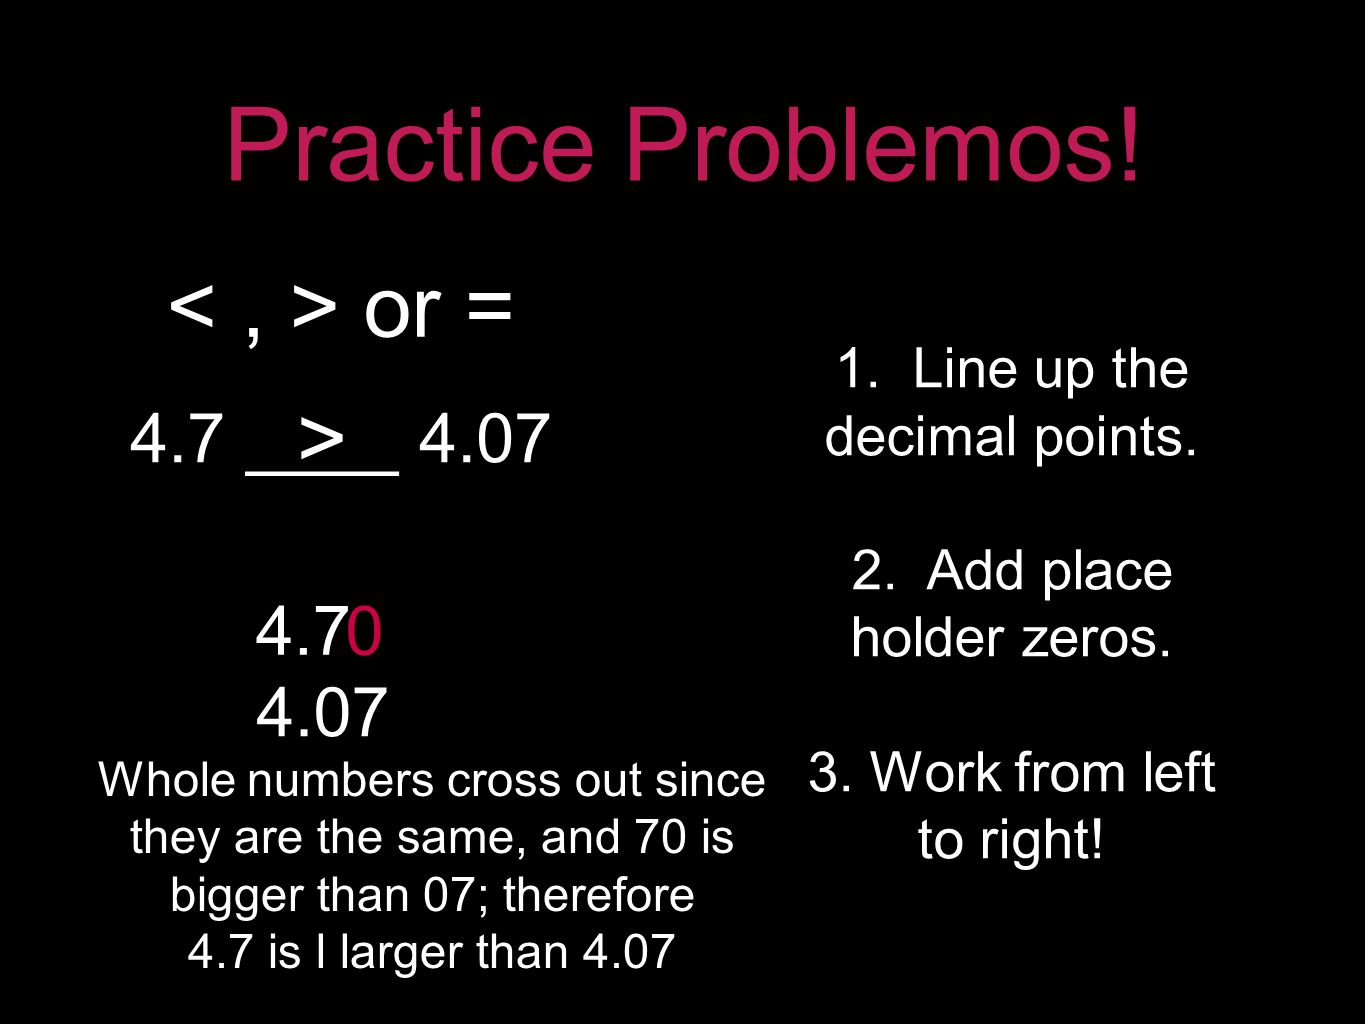 Practice Problemos. 4.7 ____ 4.07 or = 1. Line up the decimal points.